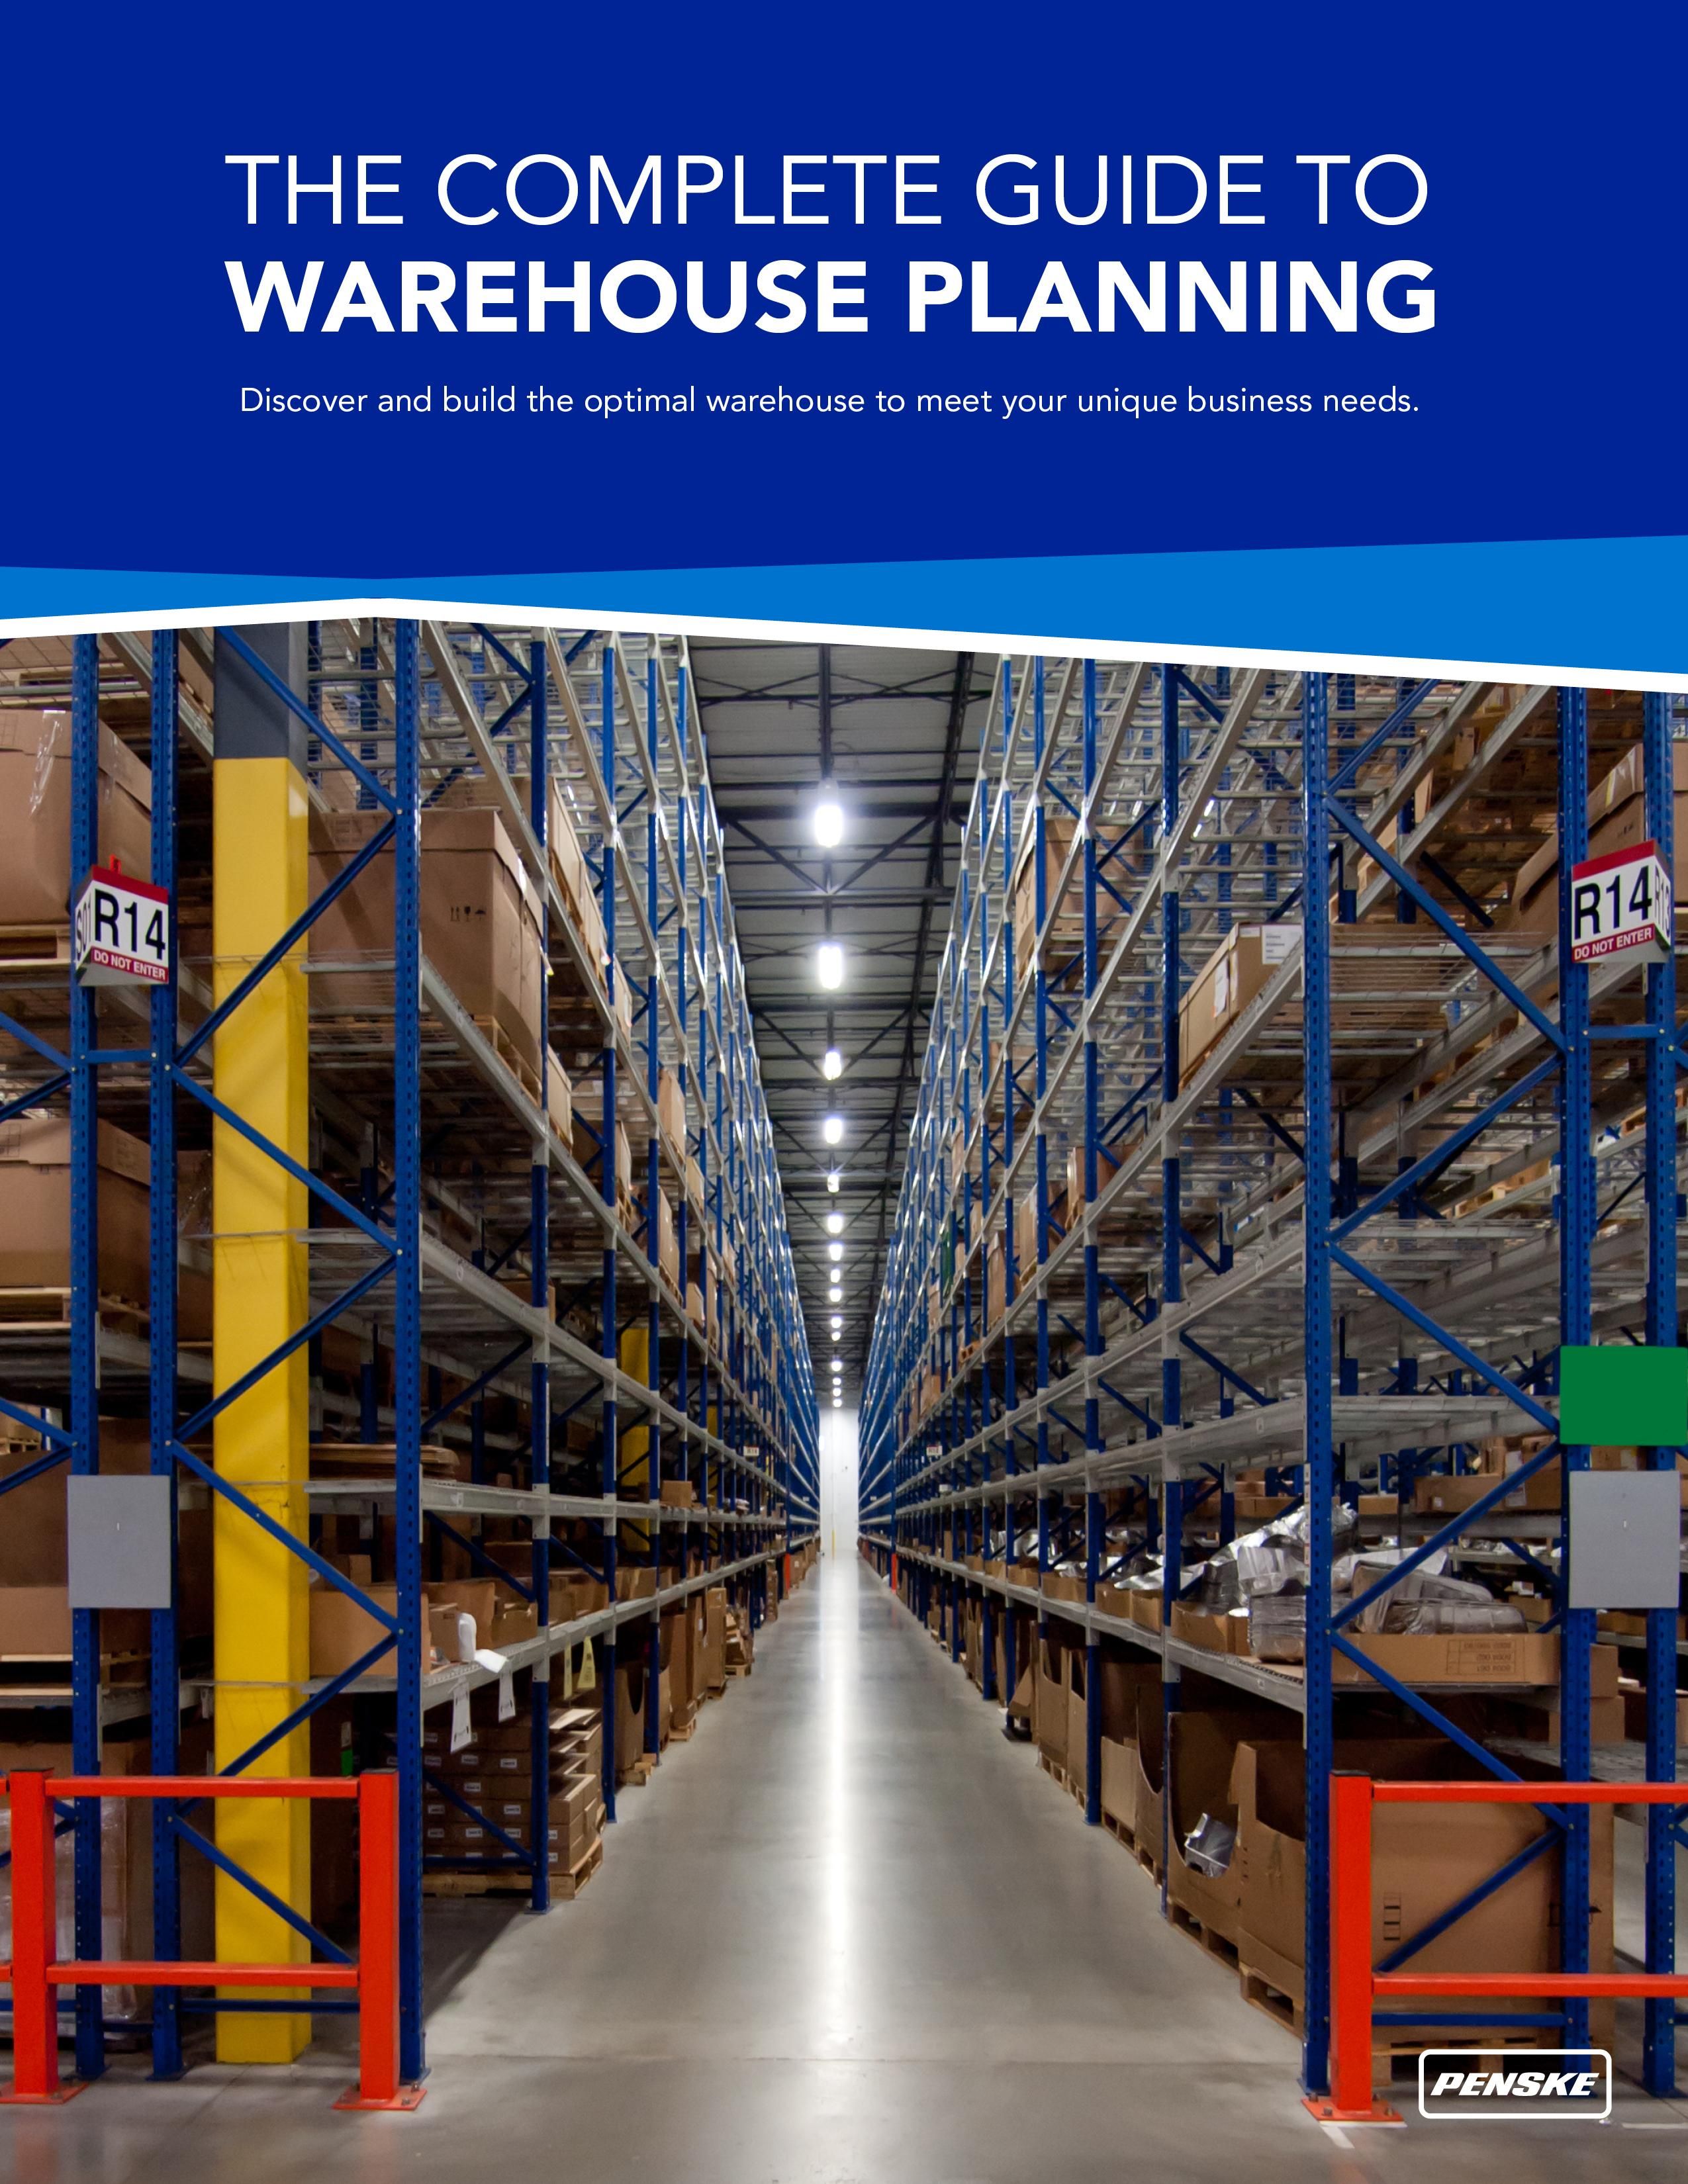 
The Complete Guide to Warehouse Planning
